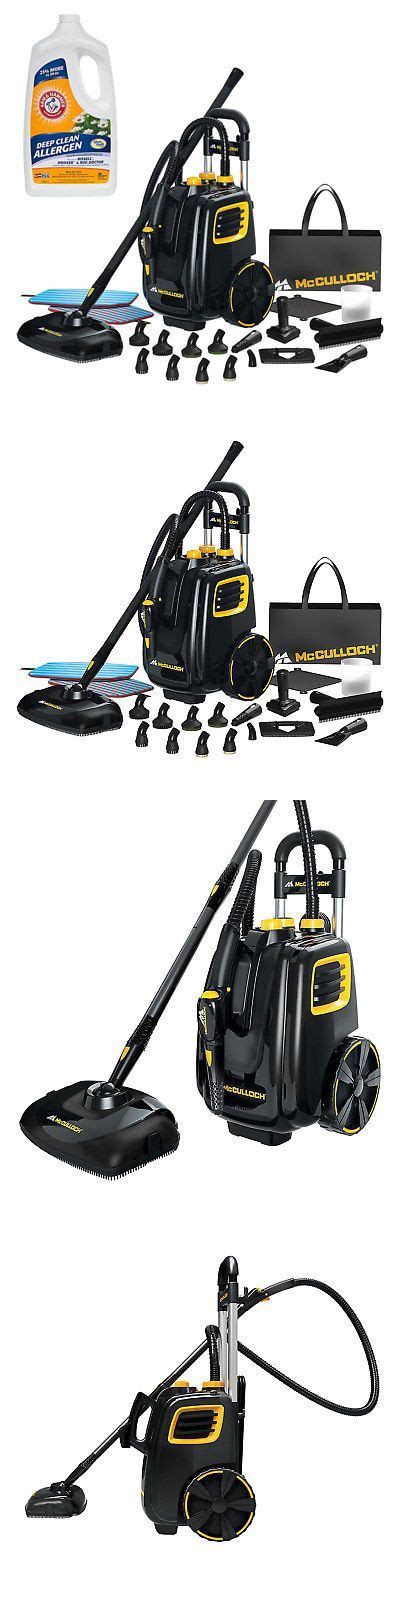 carpet shampooers  mcculloch deluxe canister multi floor steam cleaner system  carpet